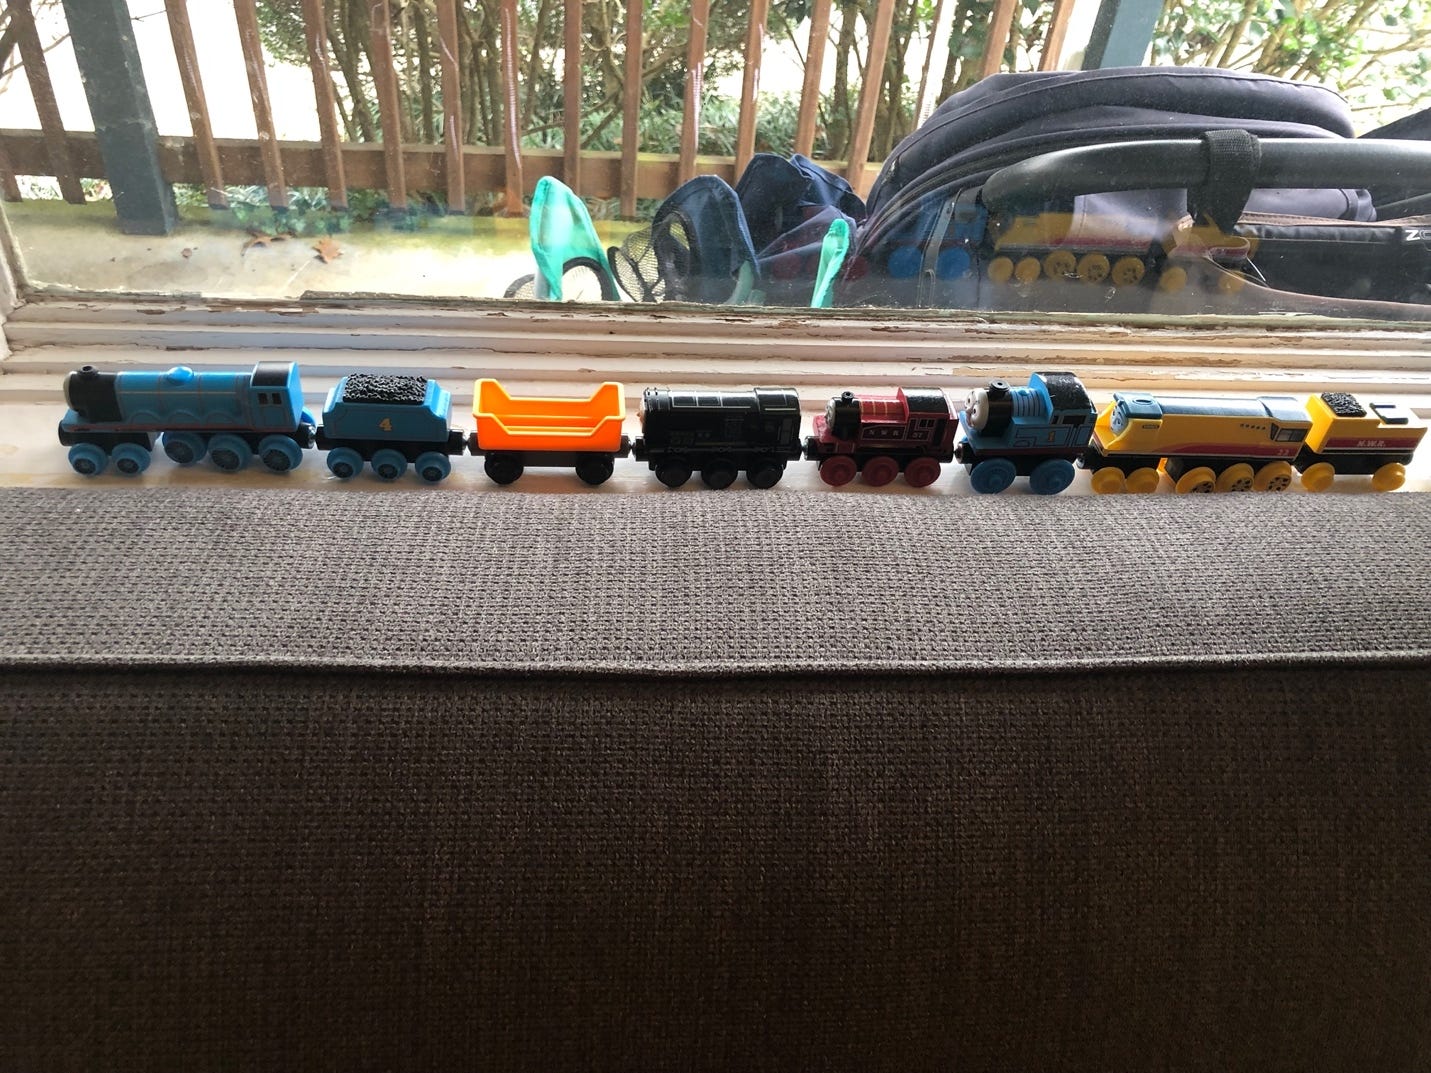 A toy train on a couch

Description automatically generated